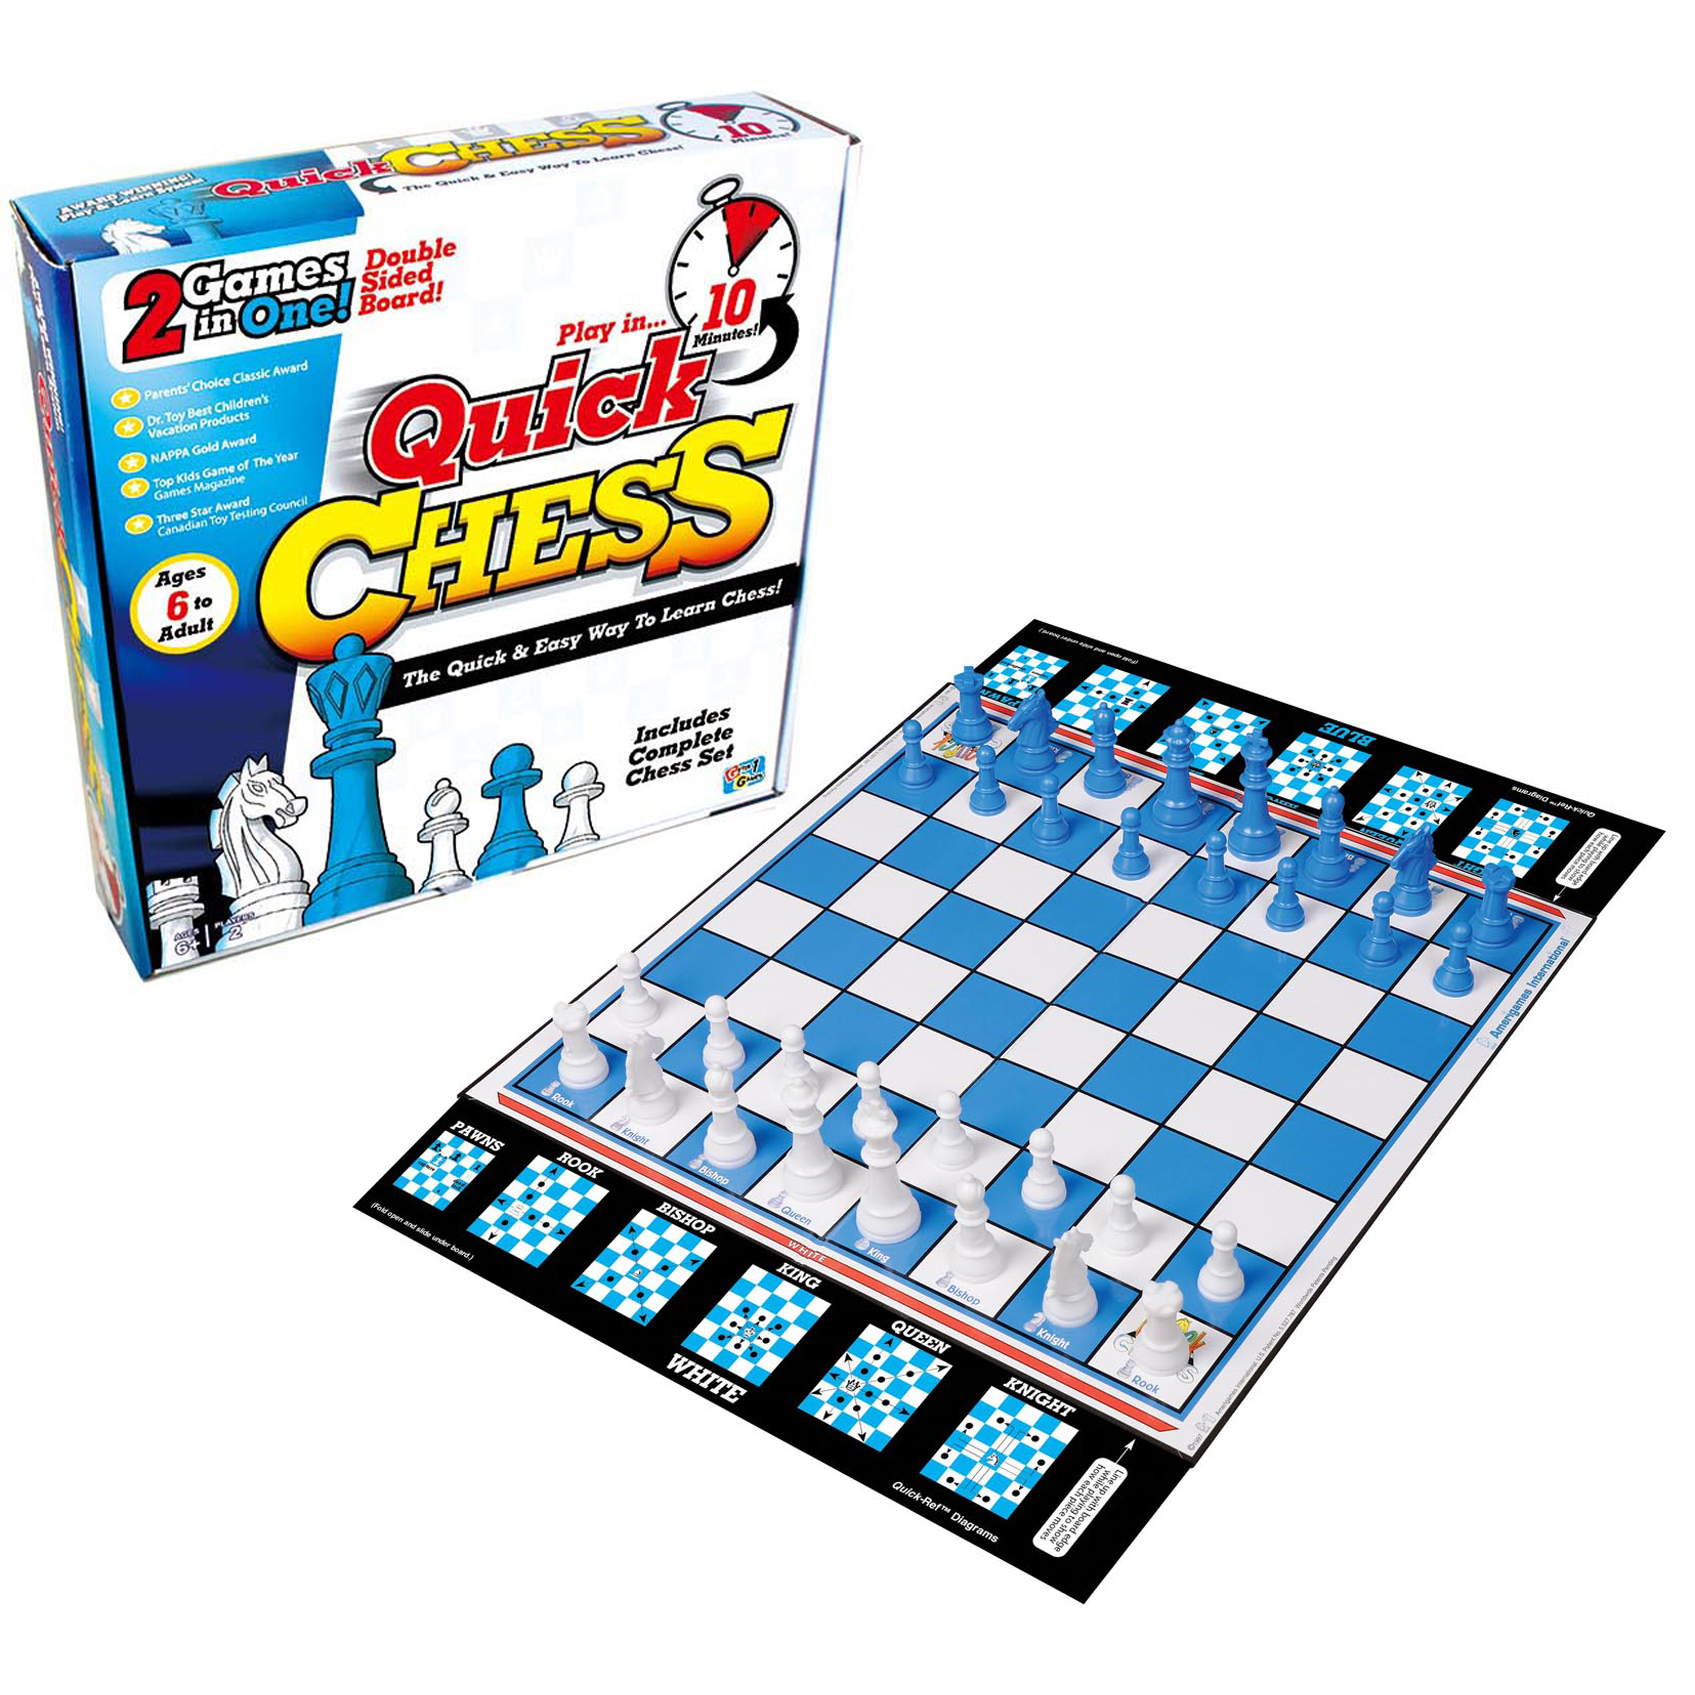 ROO GAMES Quick Chess - Learn Chess with 8 Simple Activities - For Ages 6+ image number null